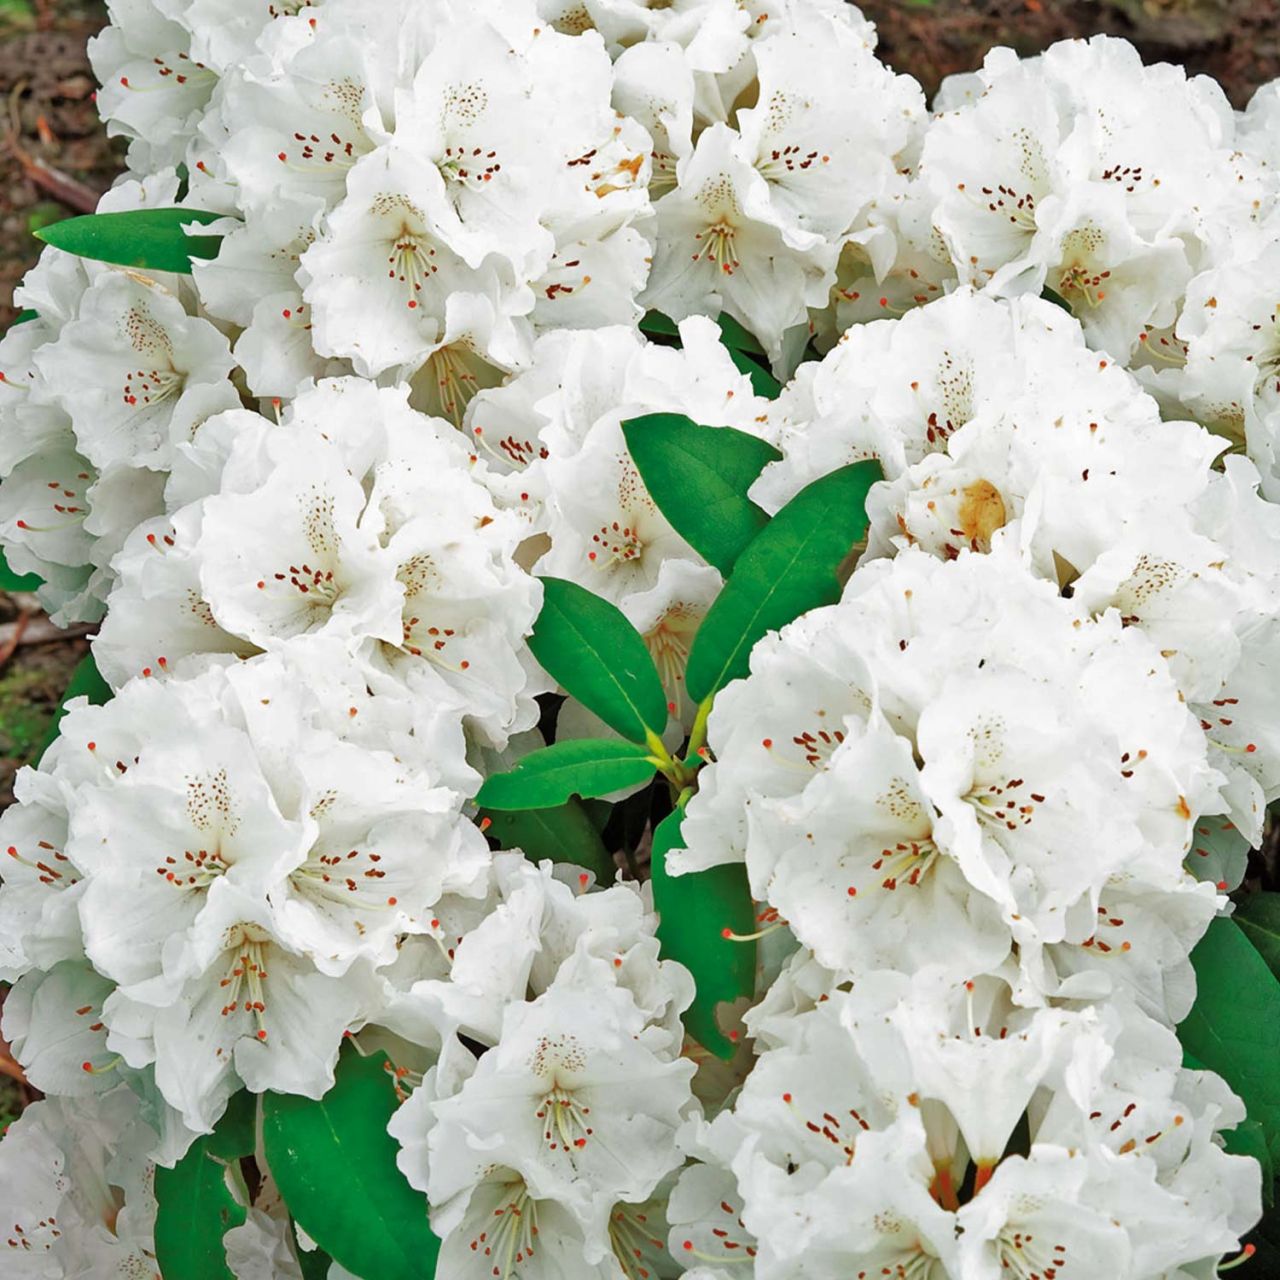 Kategorie <b>Rhododendron </b> - Ball-Rhododendron 'Schneekrone' - Rhododendron yakushimanum 'Schneekrone'